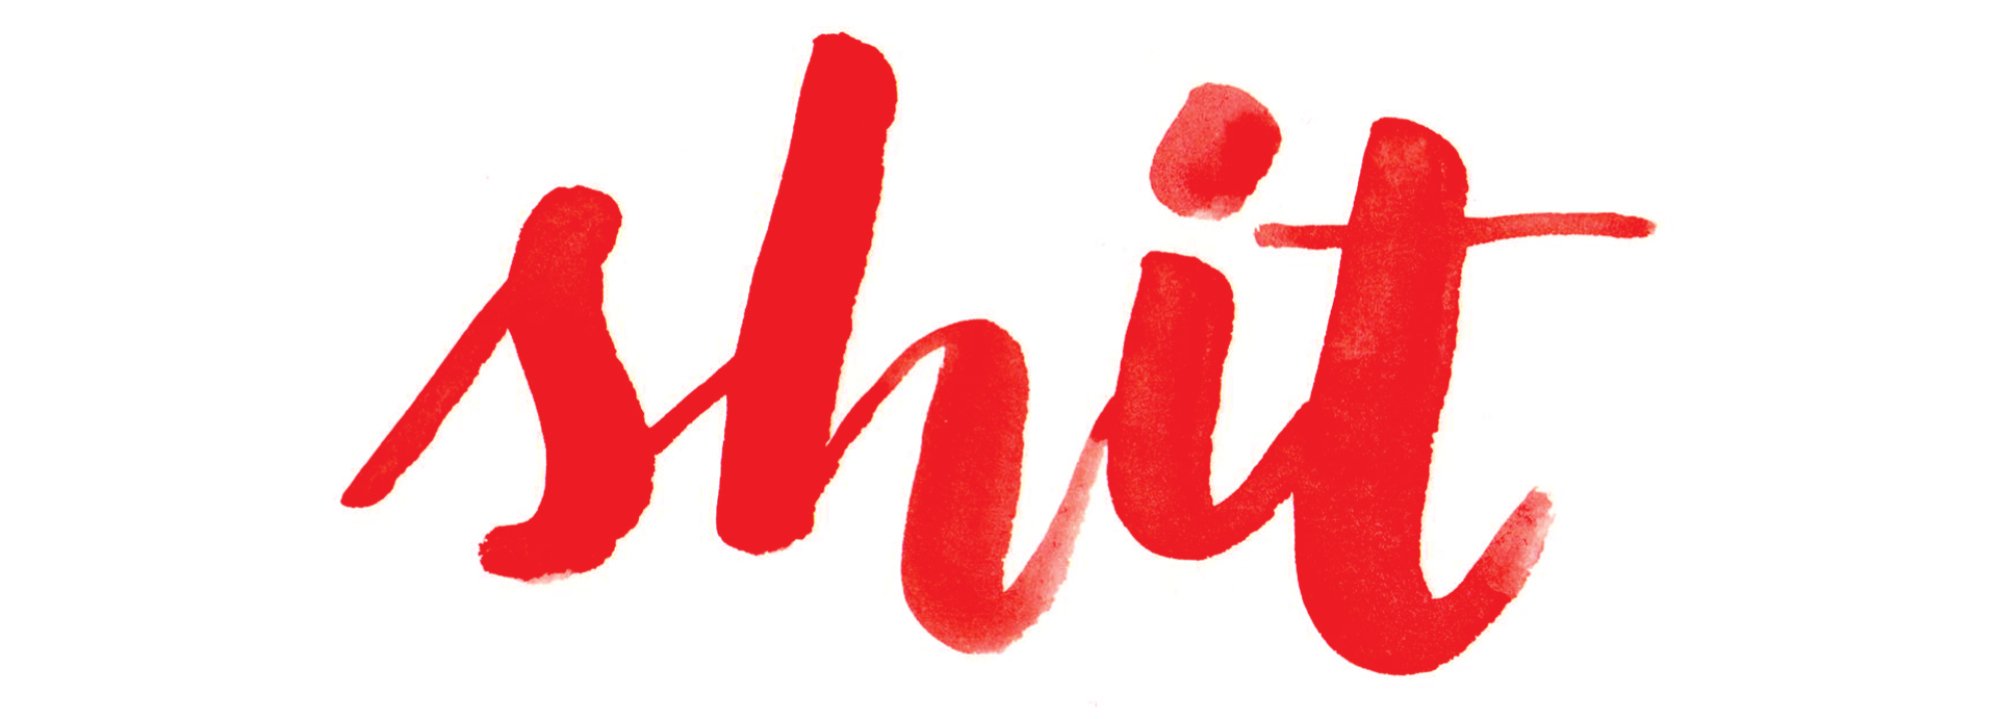 The word "shit" in red cursive lettering.